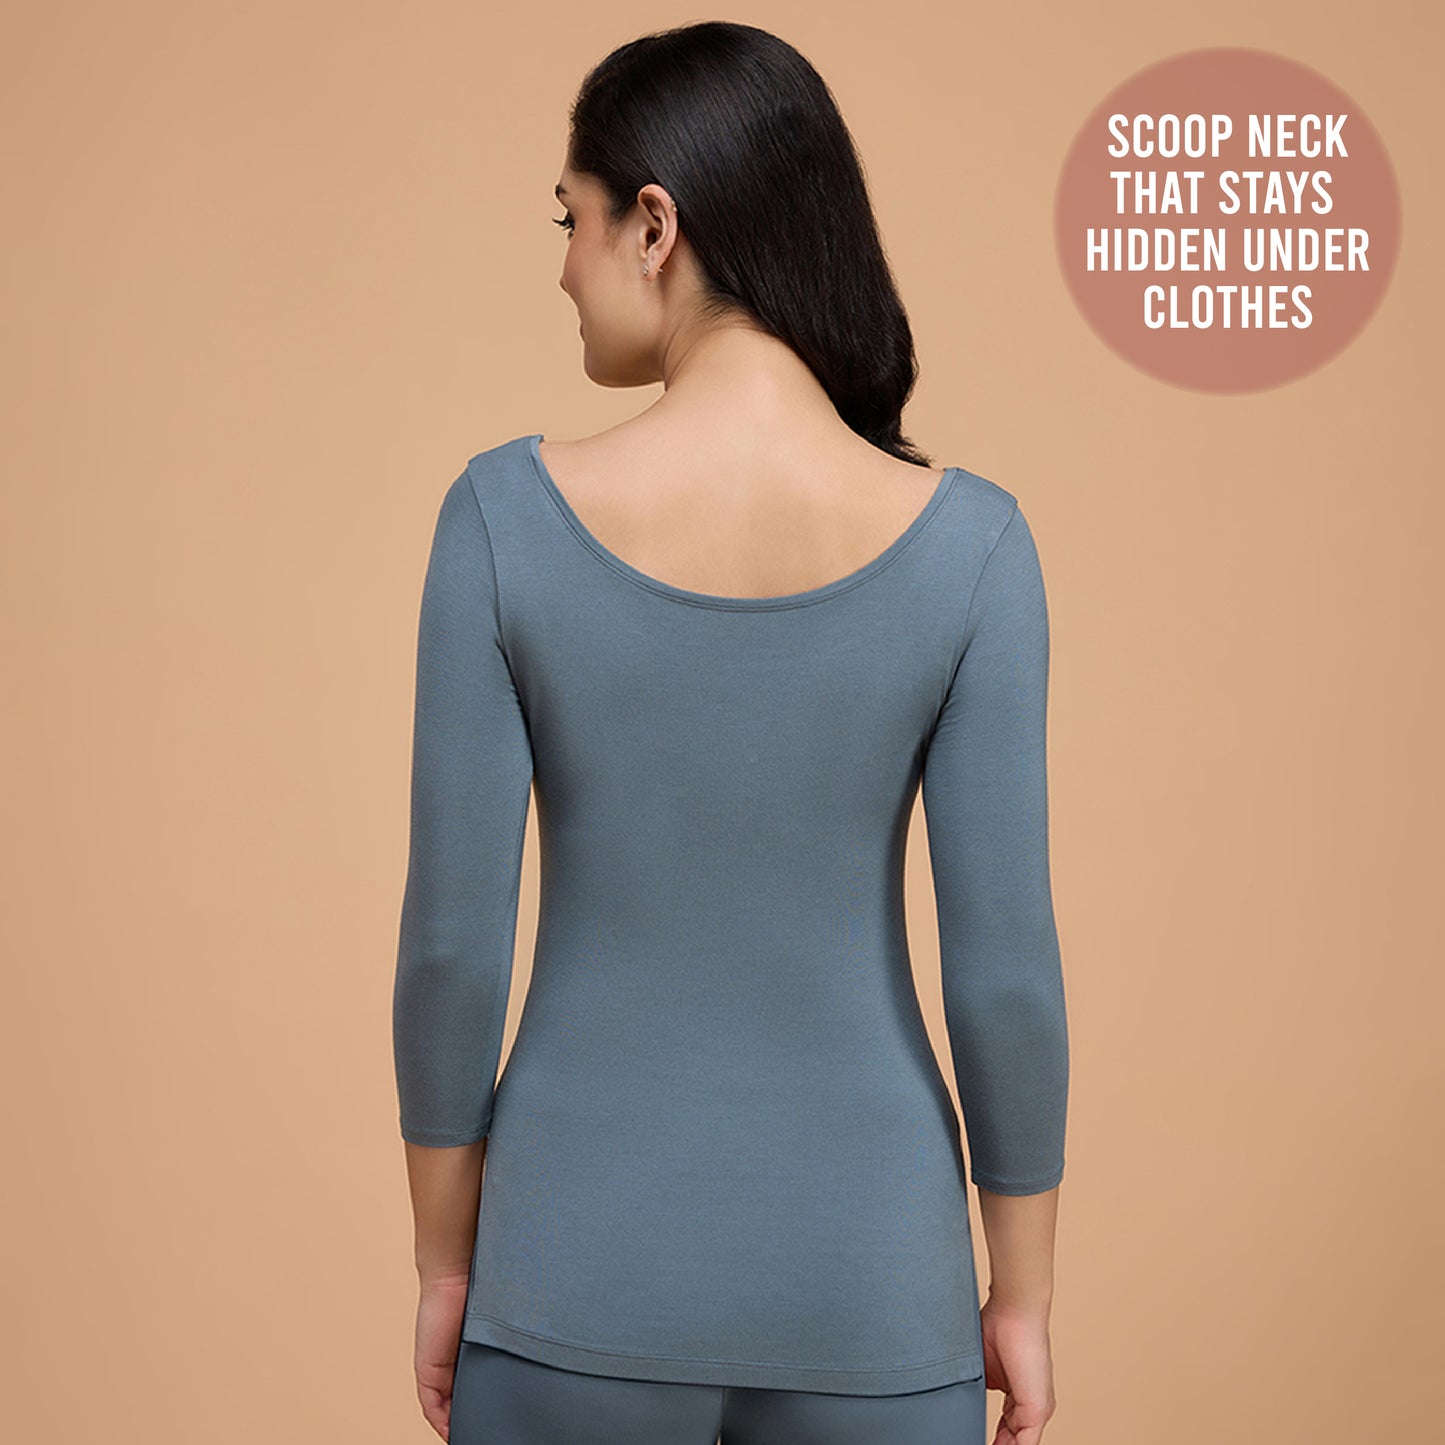 Ultra Light and Soft Thermal Top that stays hidden under clothes -NYOE05 Grey